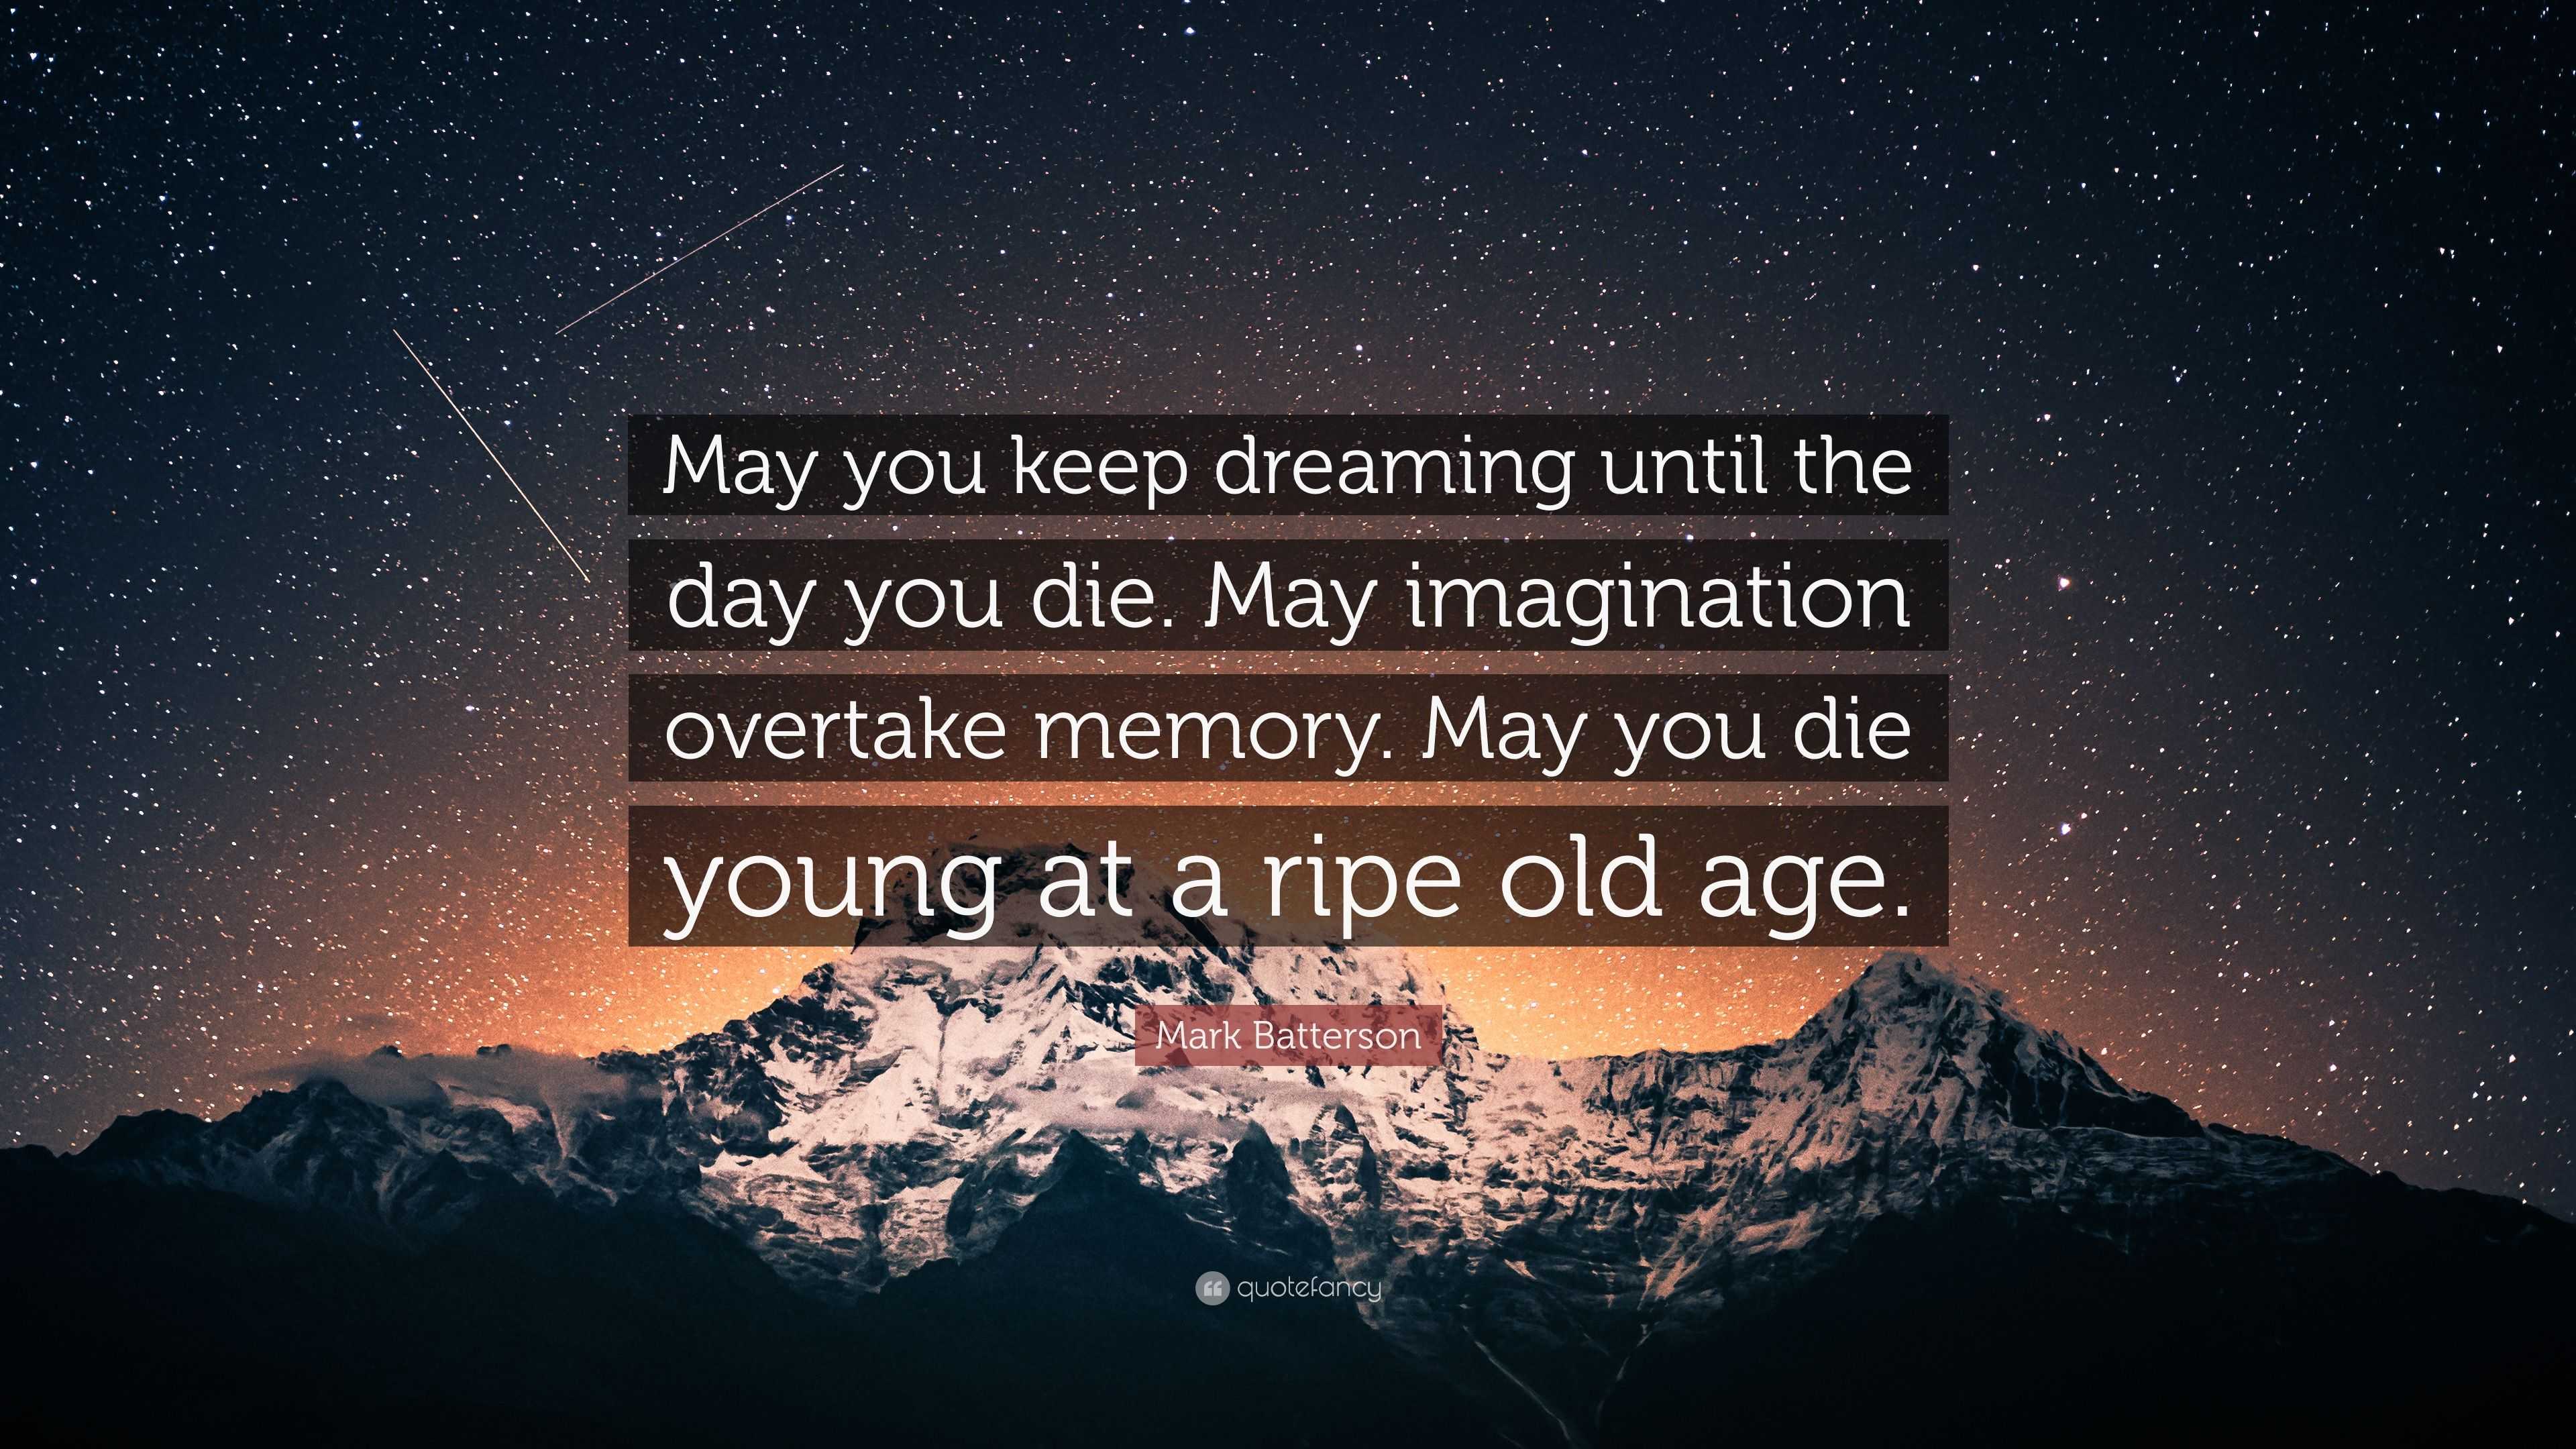 keep dreaming quotes